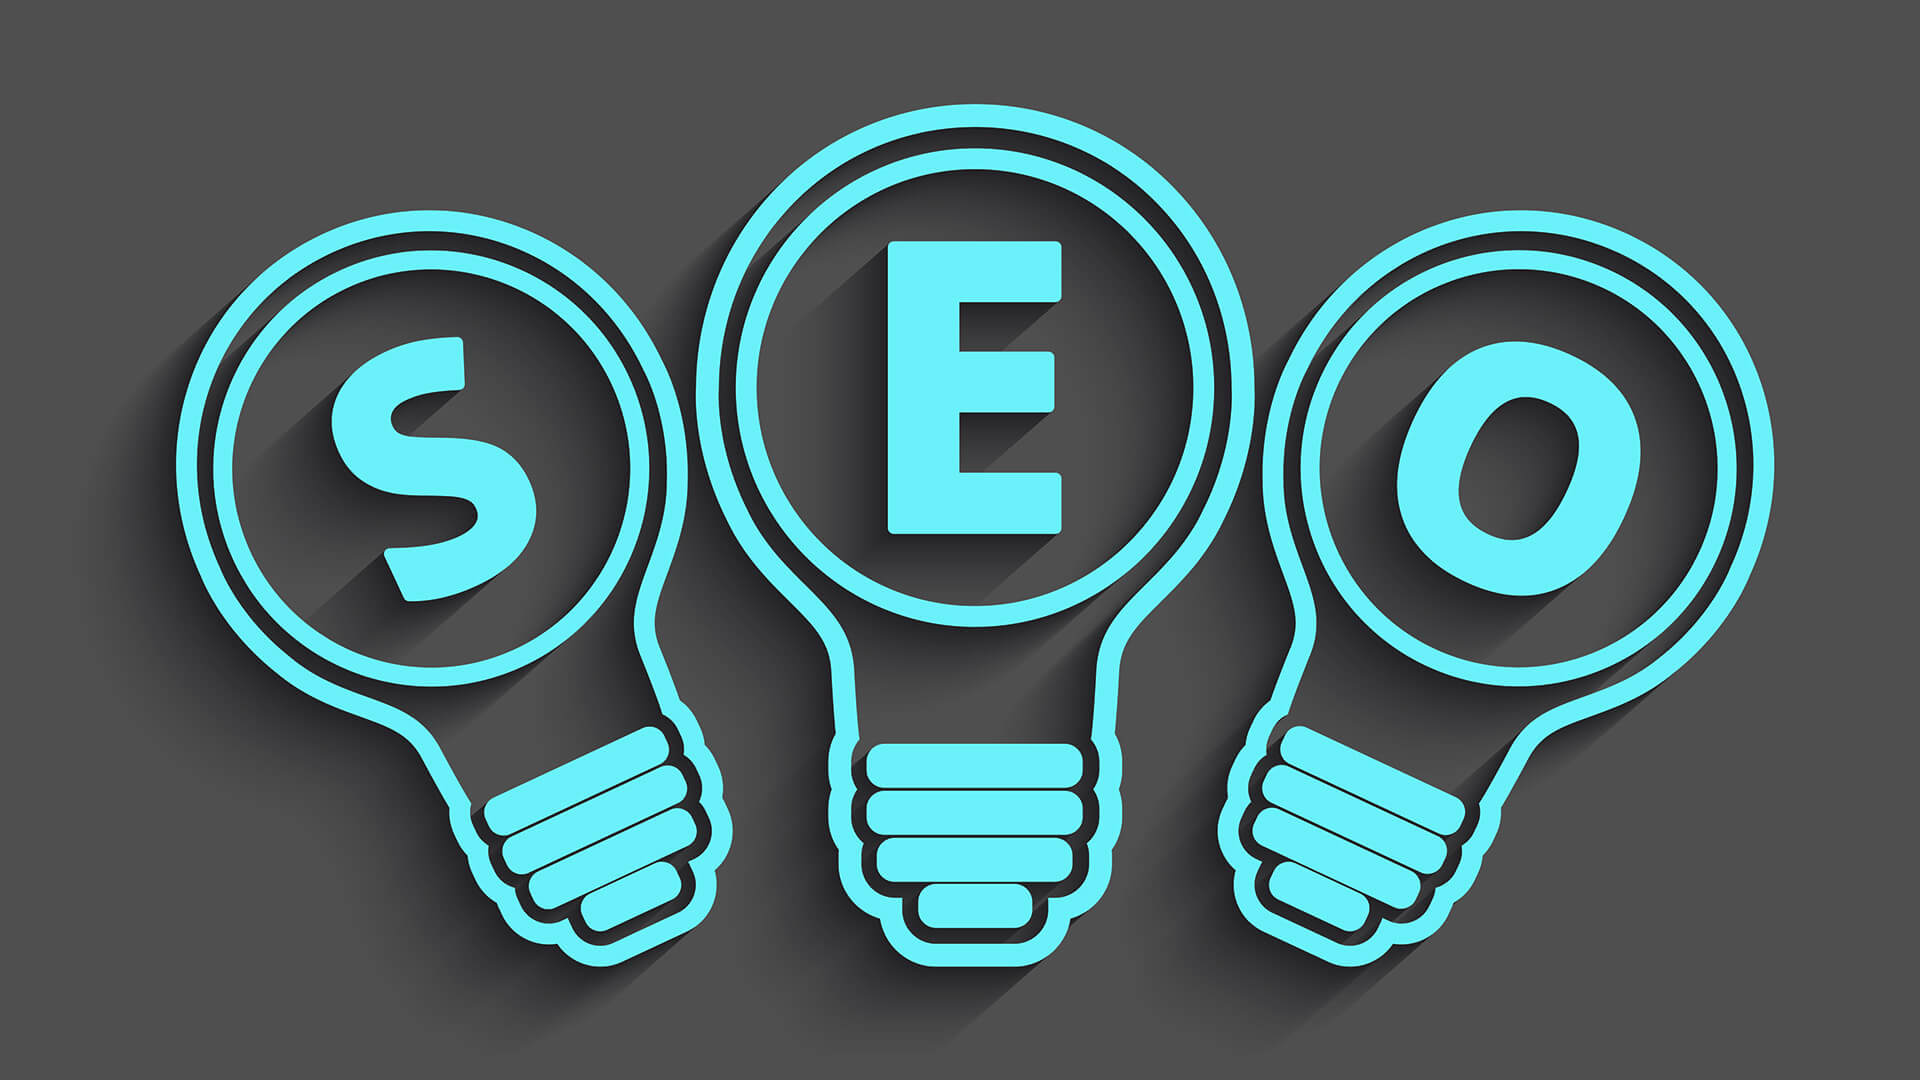 produce effective scripts with the SEO standards